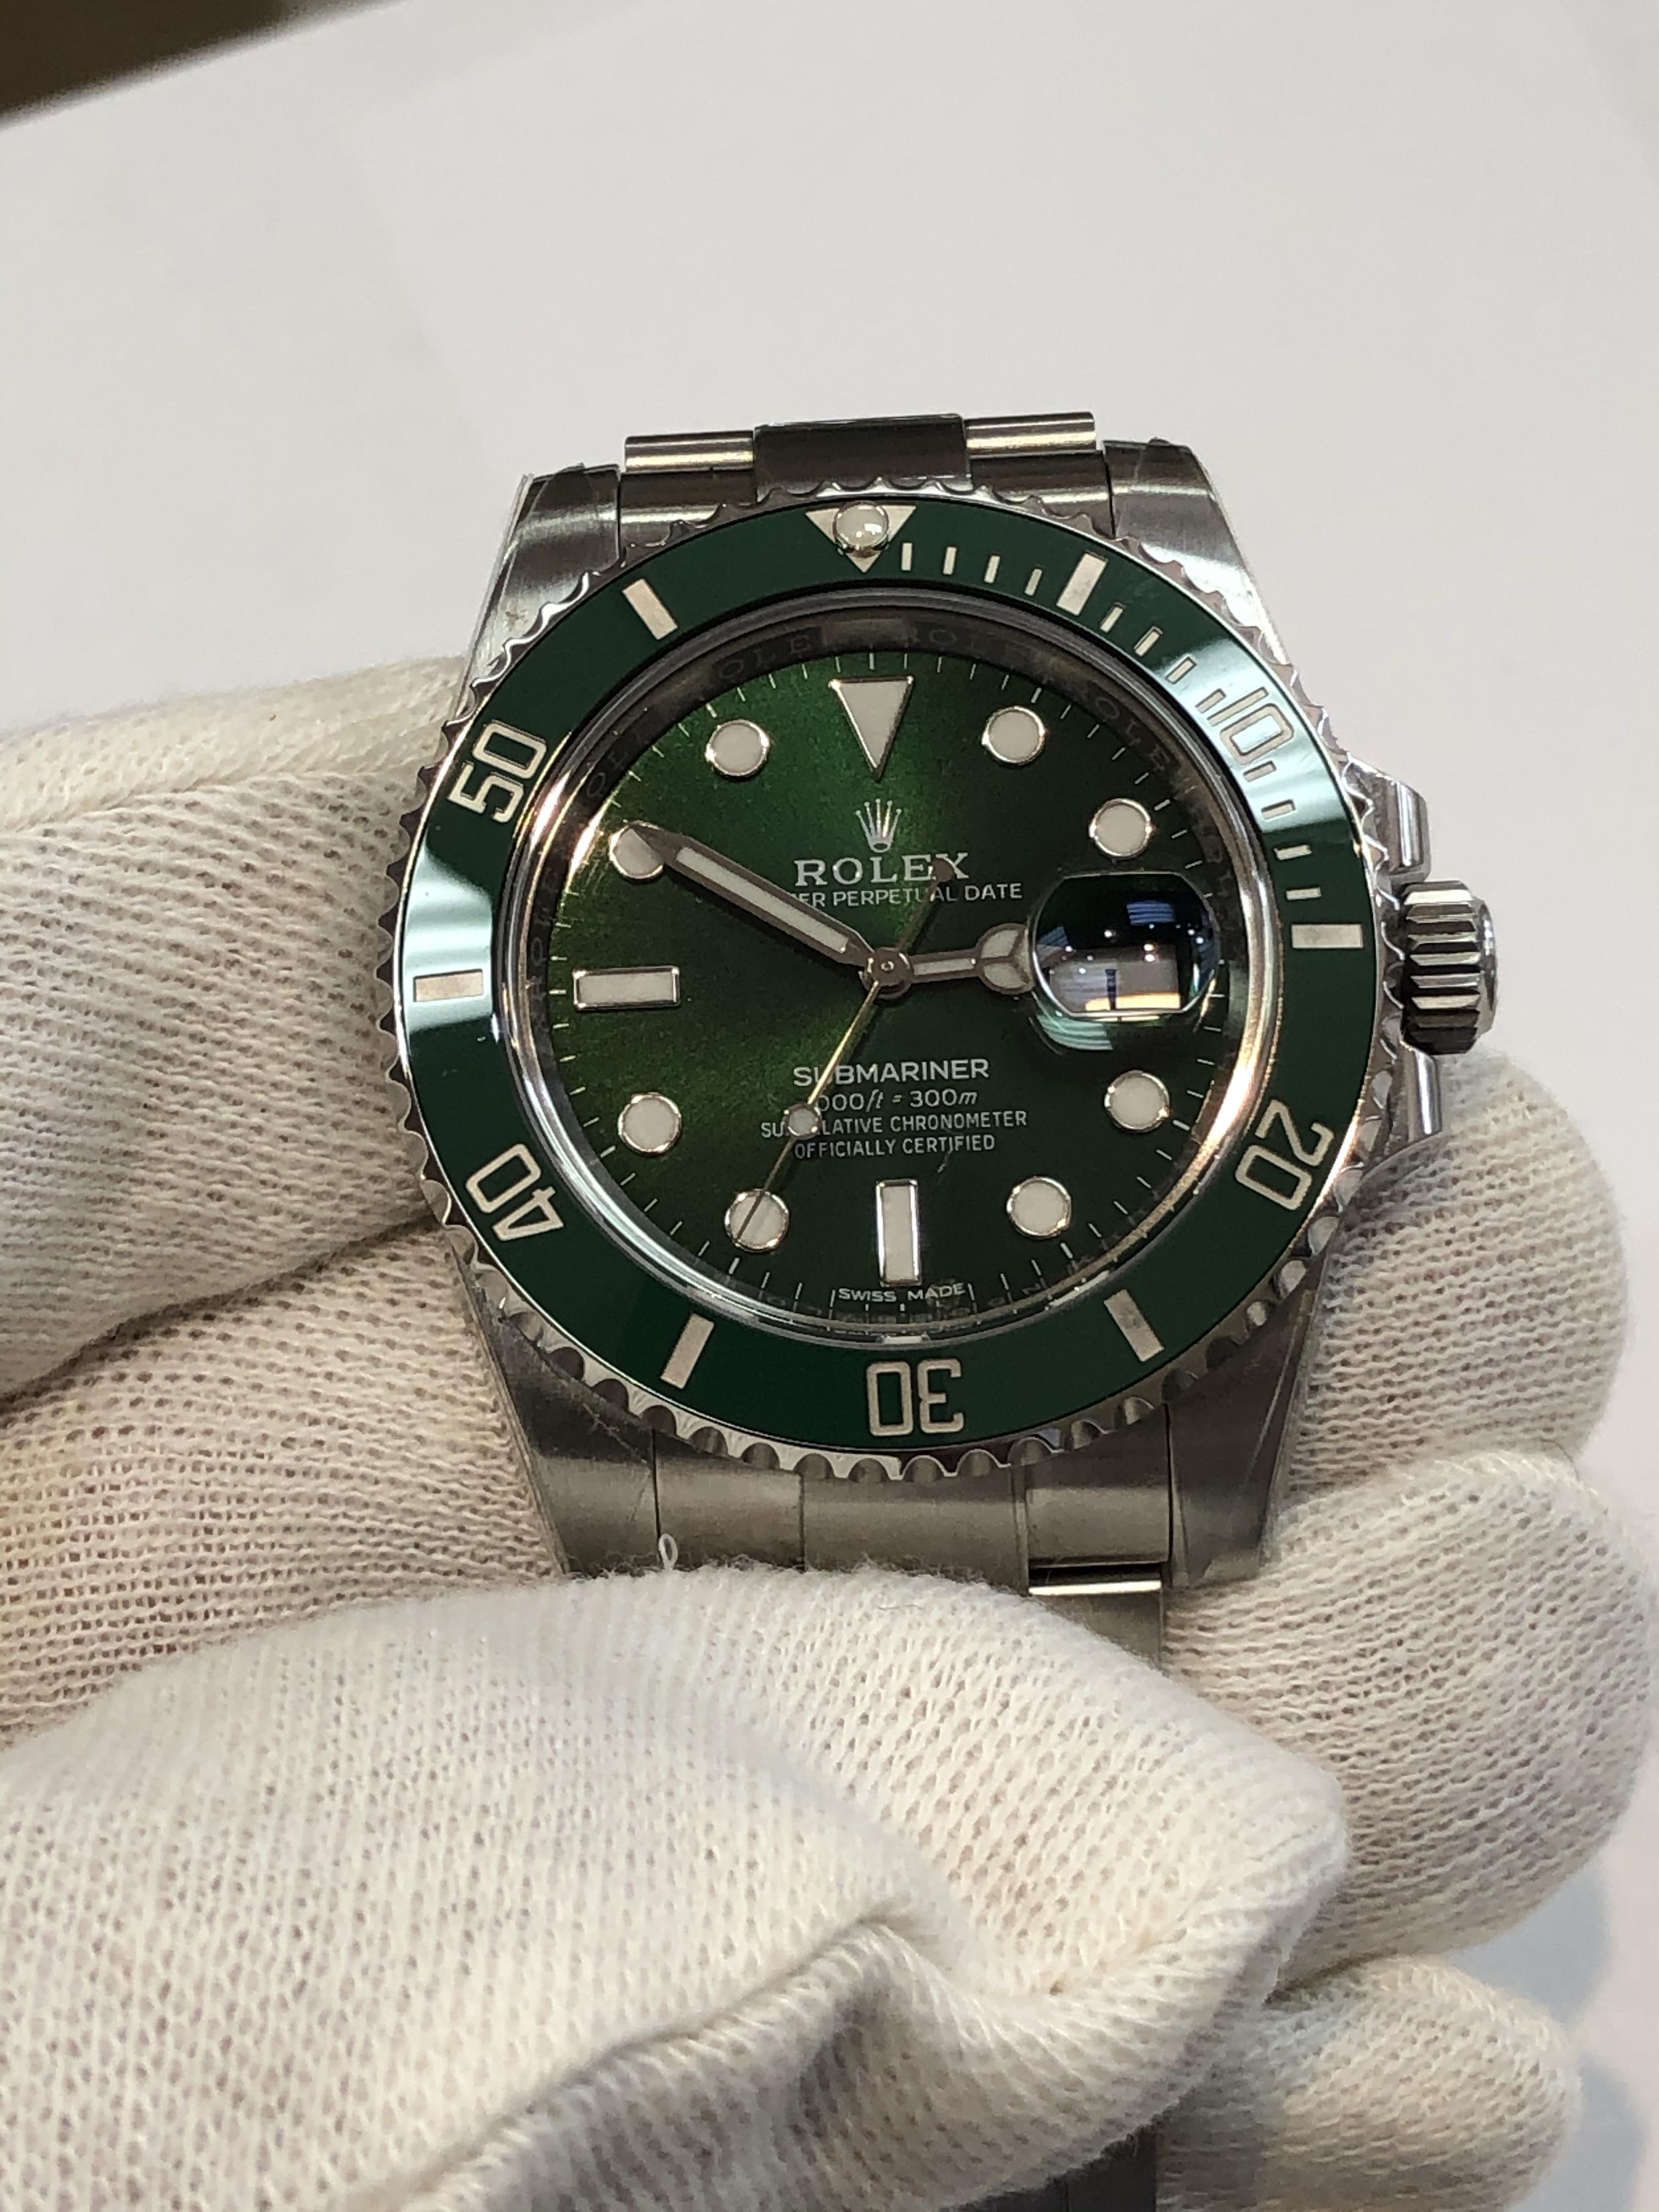 116610LV Hulk Submariner 2014 Full Set Complete with Box and Papers